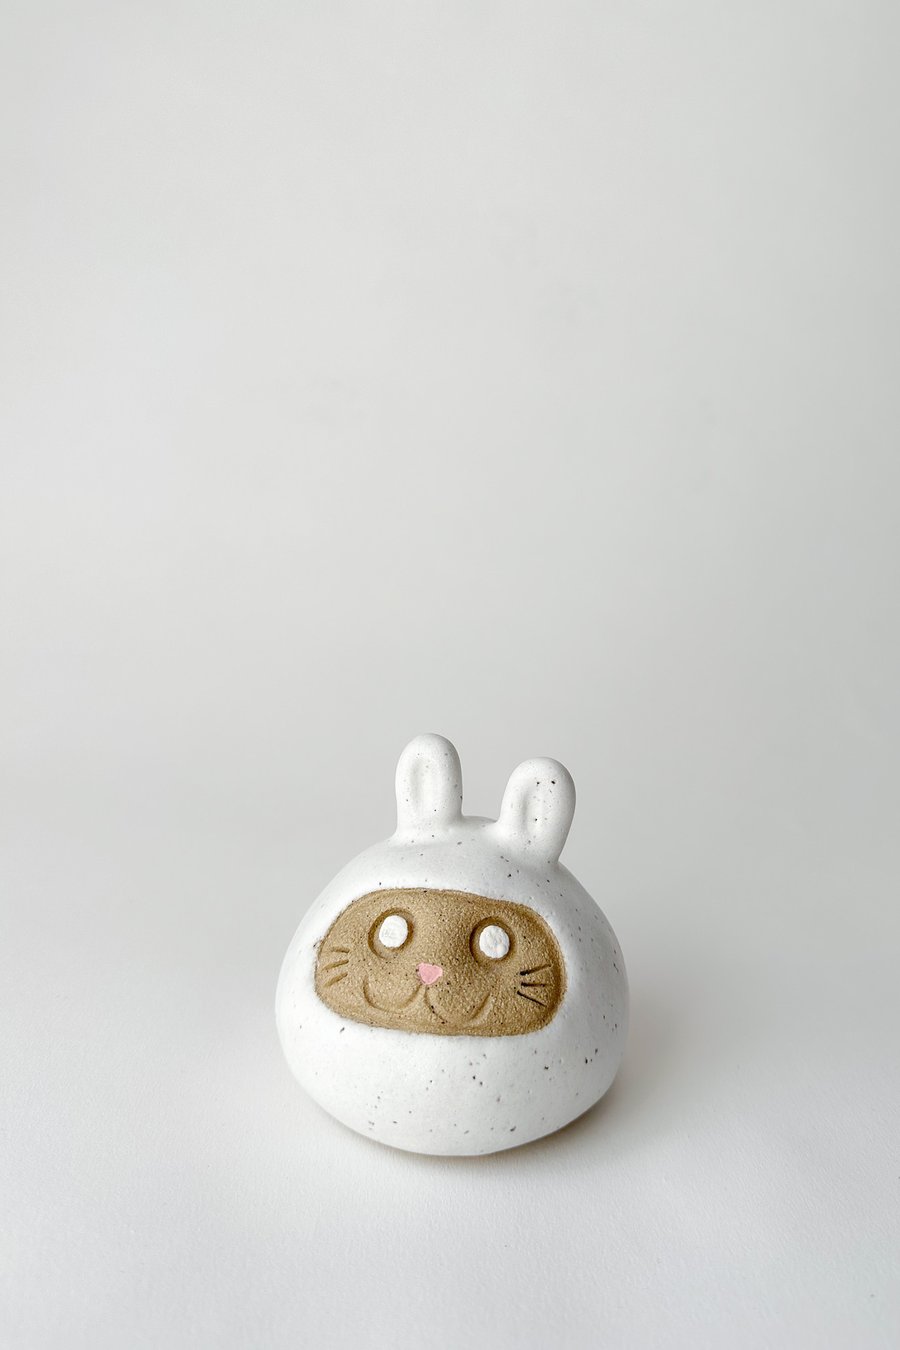 Image of Large Lunar New Year Bunny Daruma Wishing Doll - Matte Speckled White